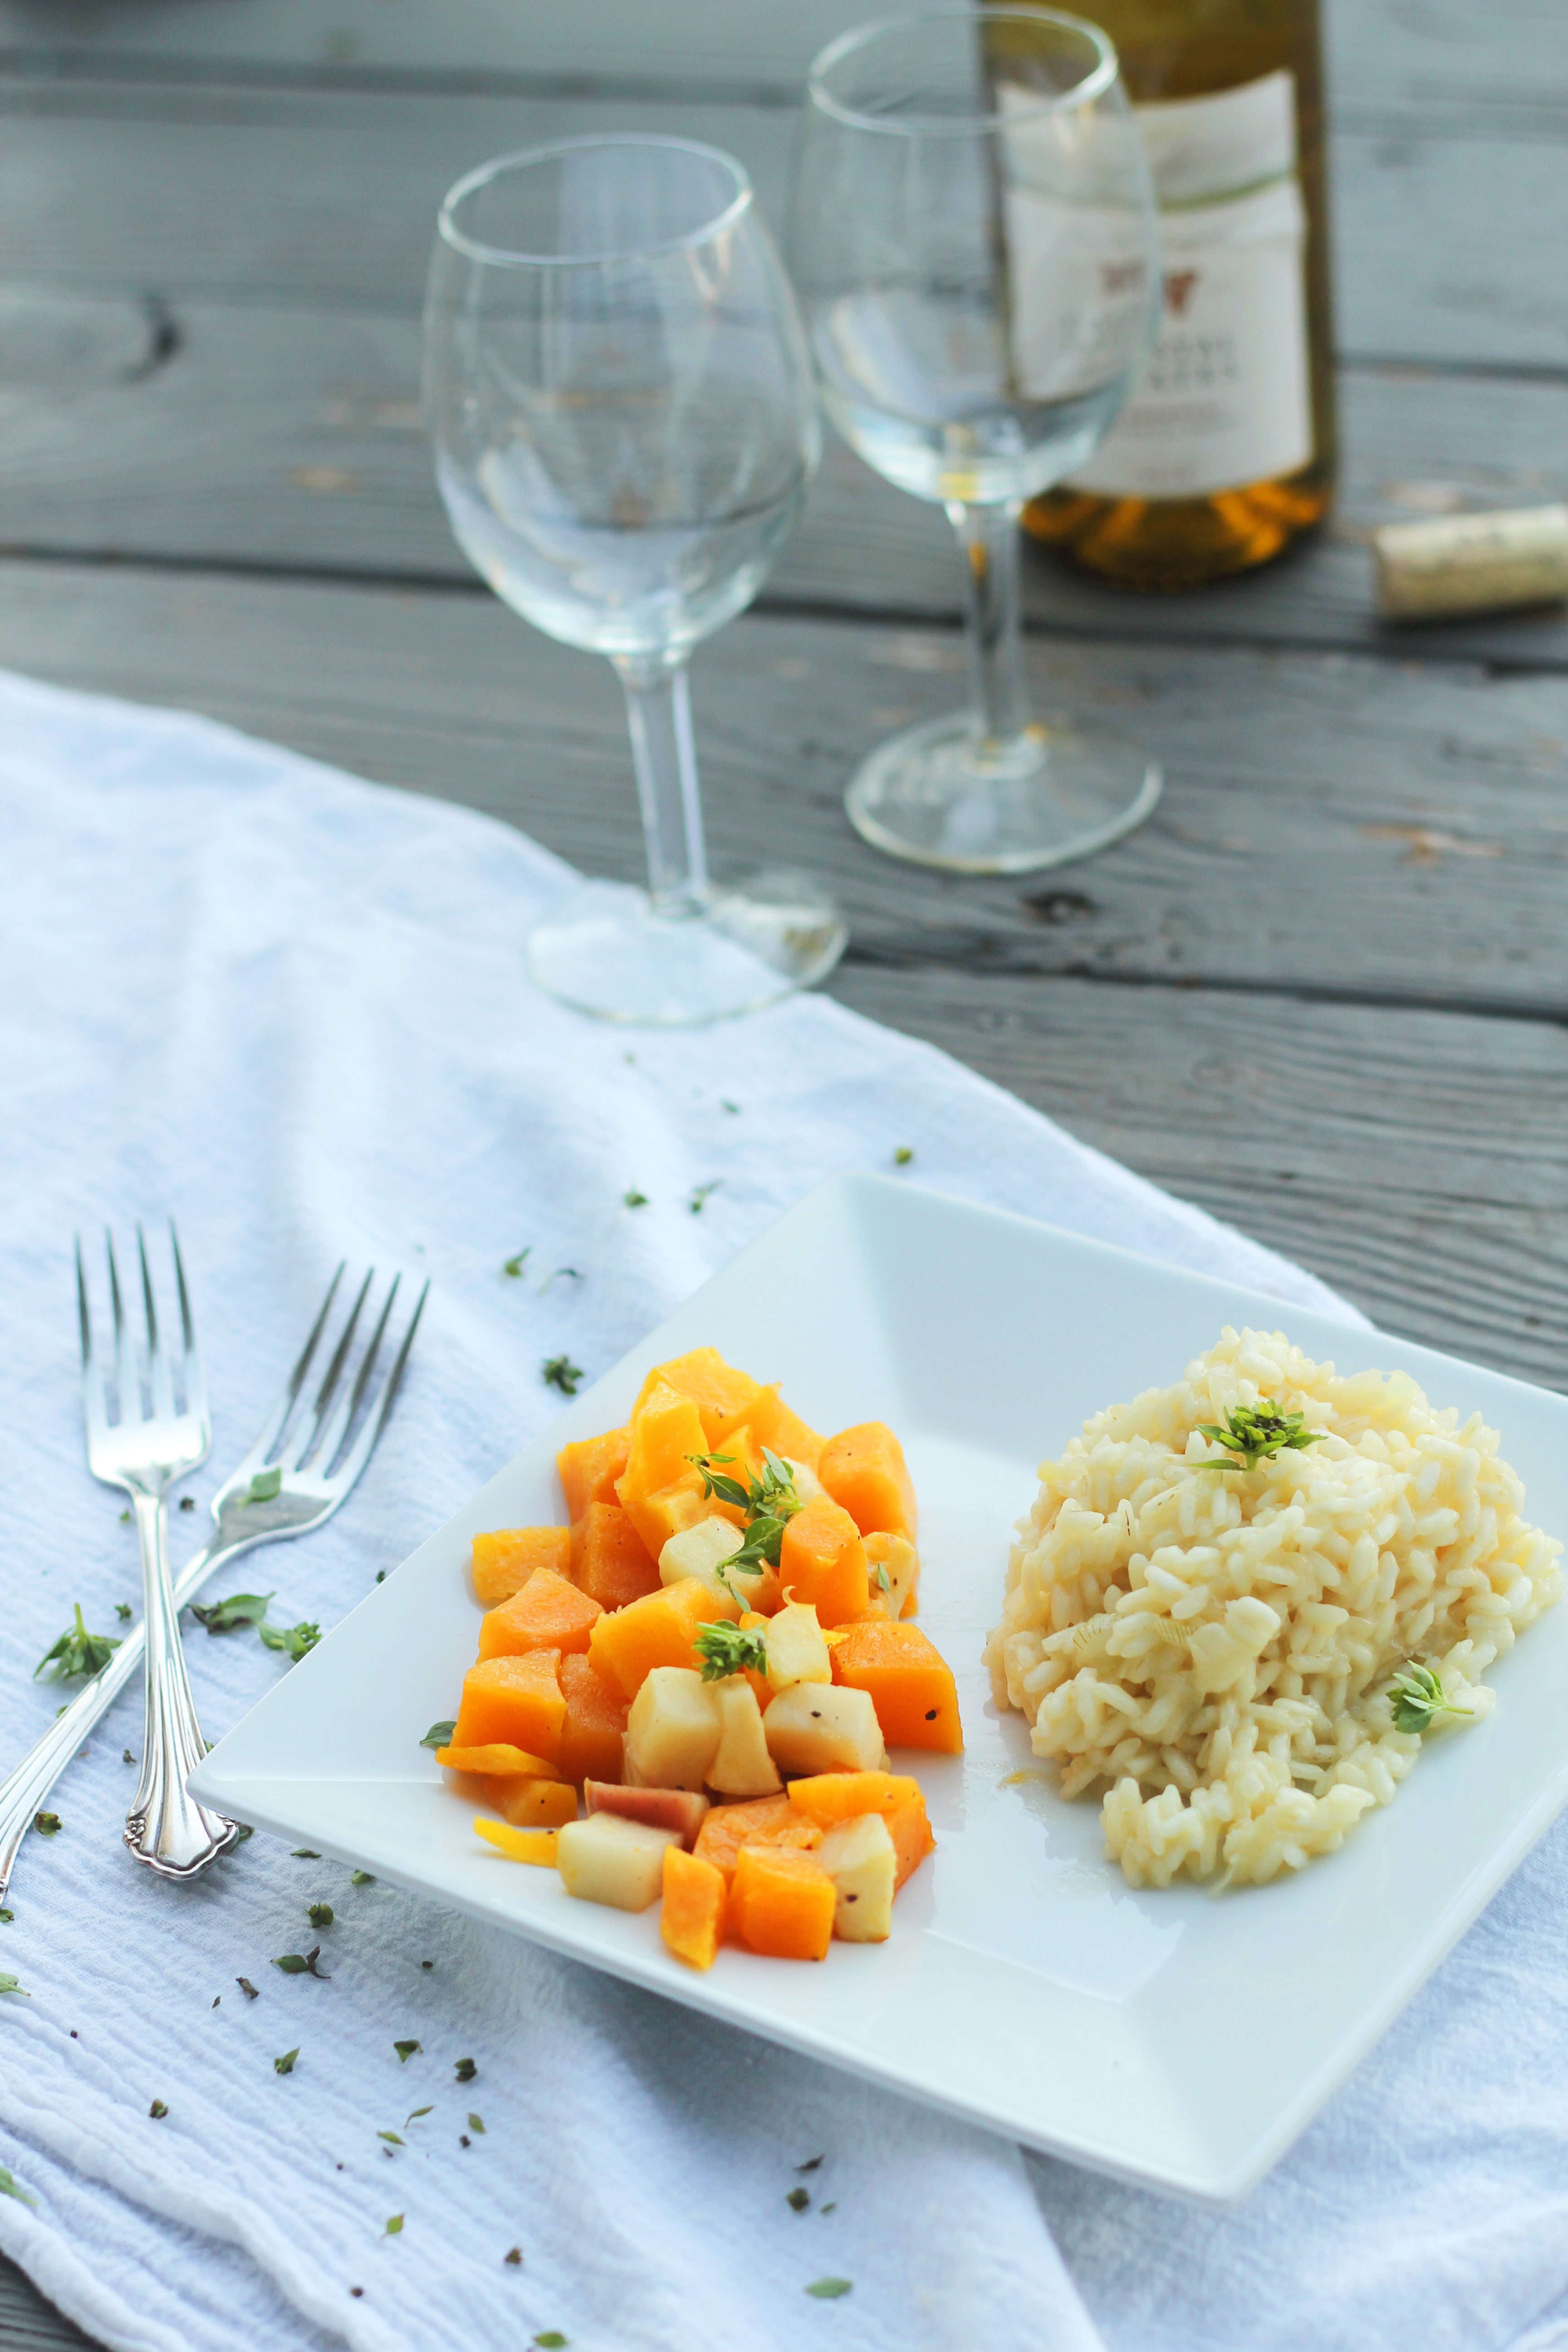 Roasted Butternut Squash & Apples with Risotto